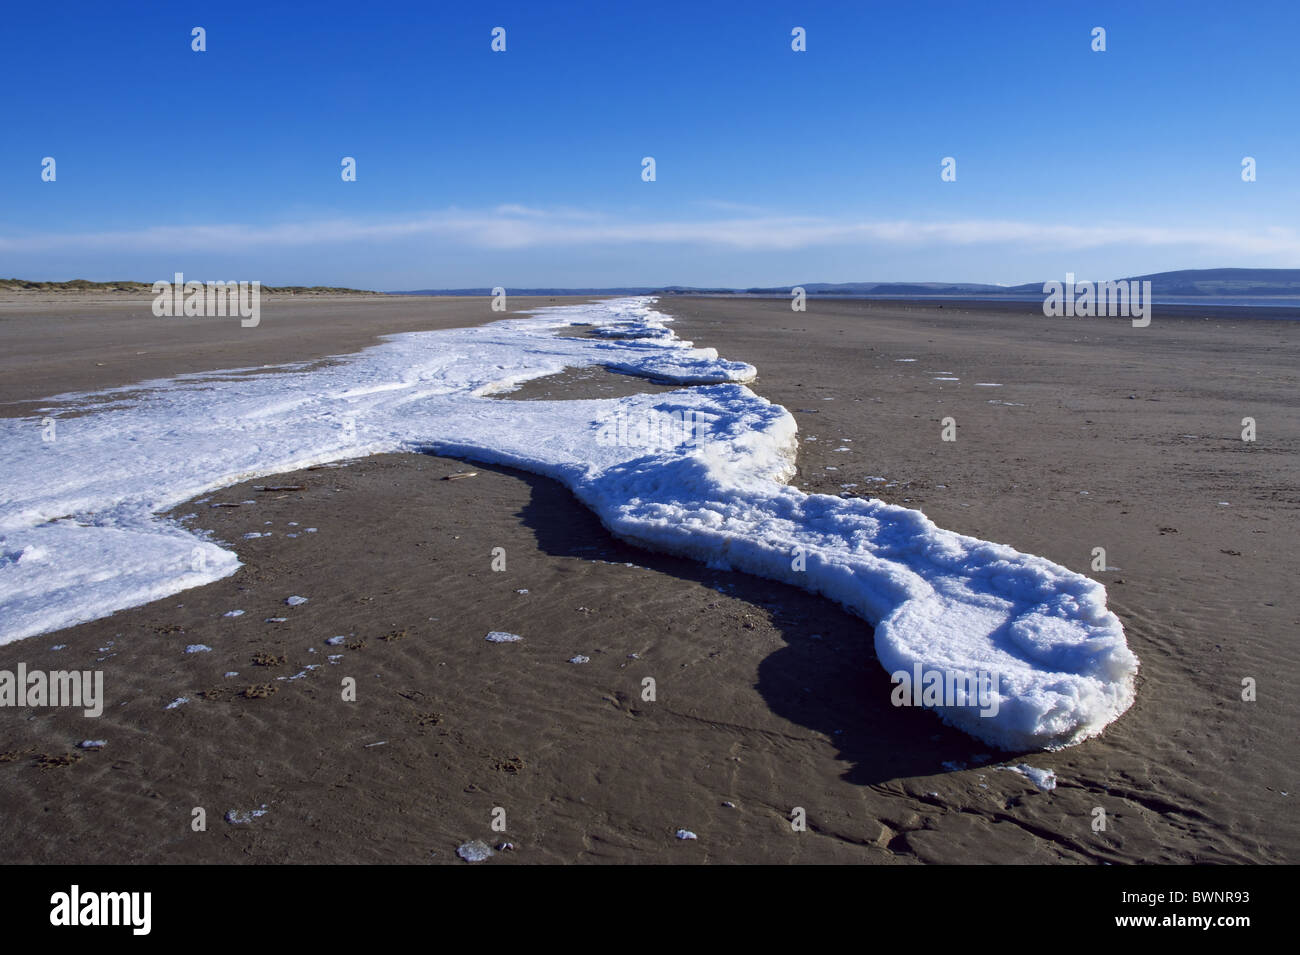 Sea ice along the tide line on the beach at Cefn Sidan in Wales. Stock Photo